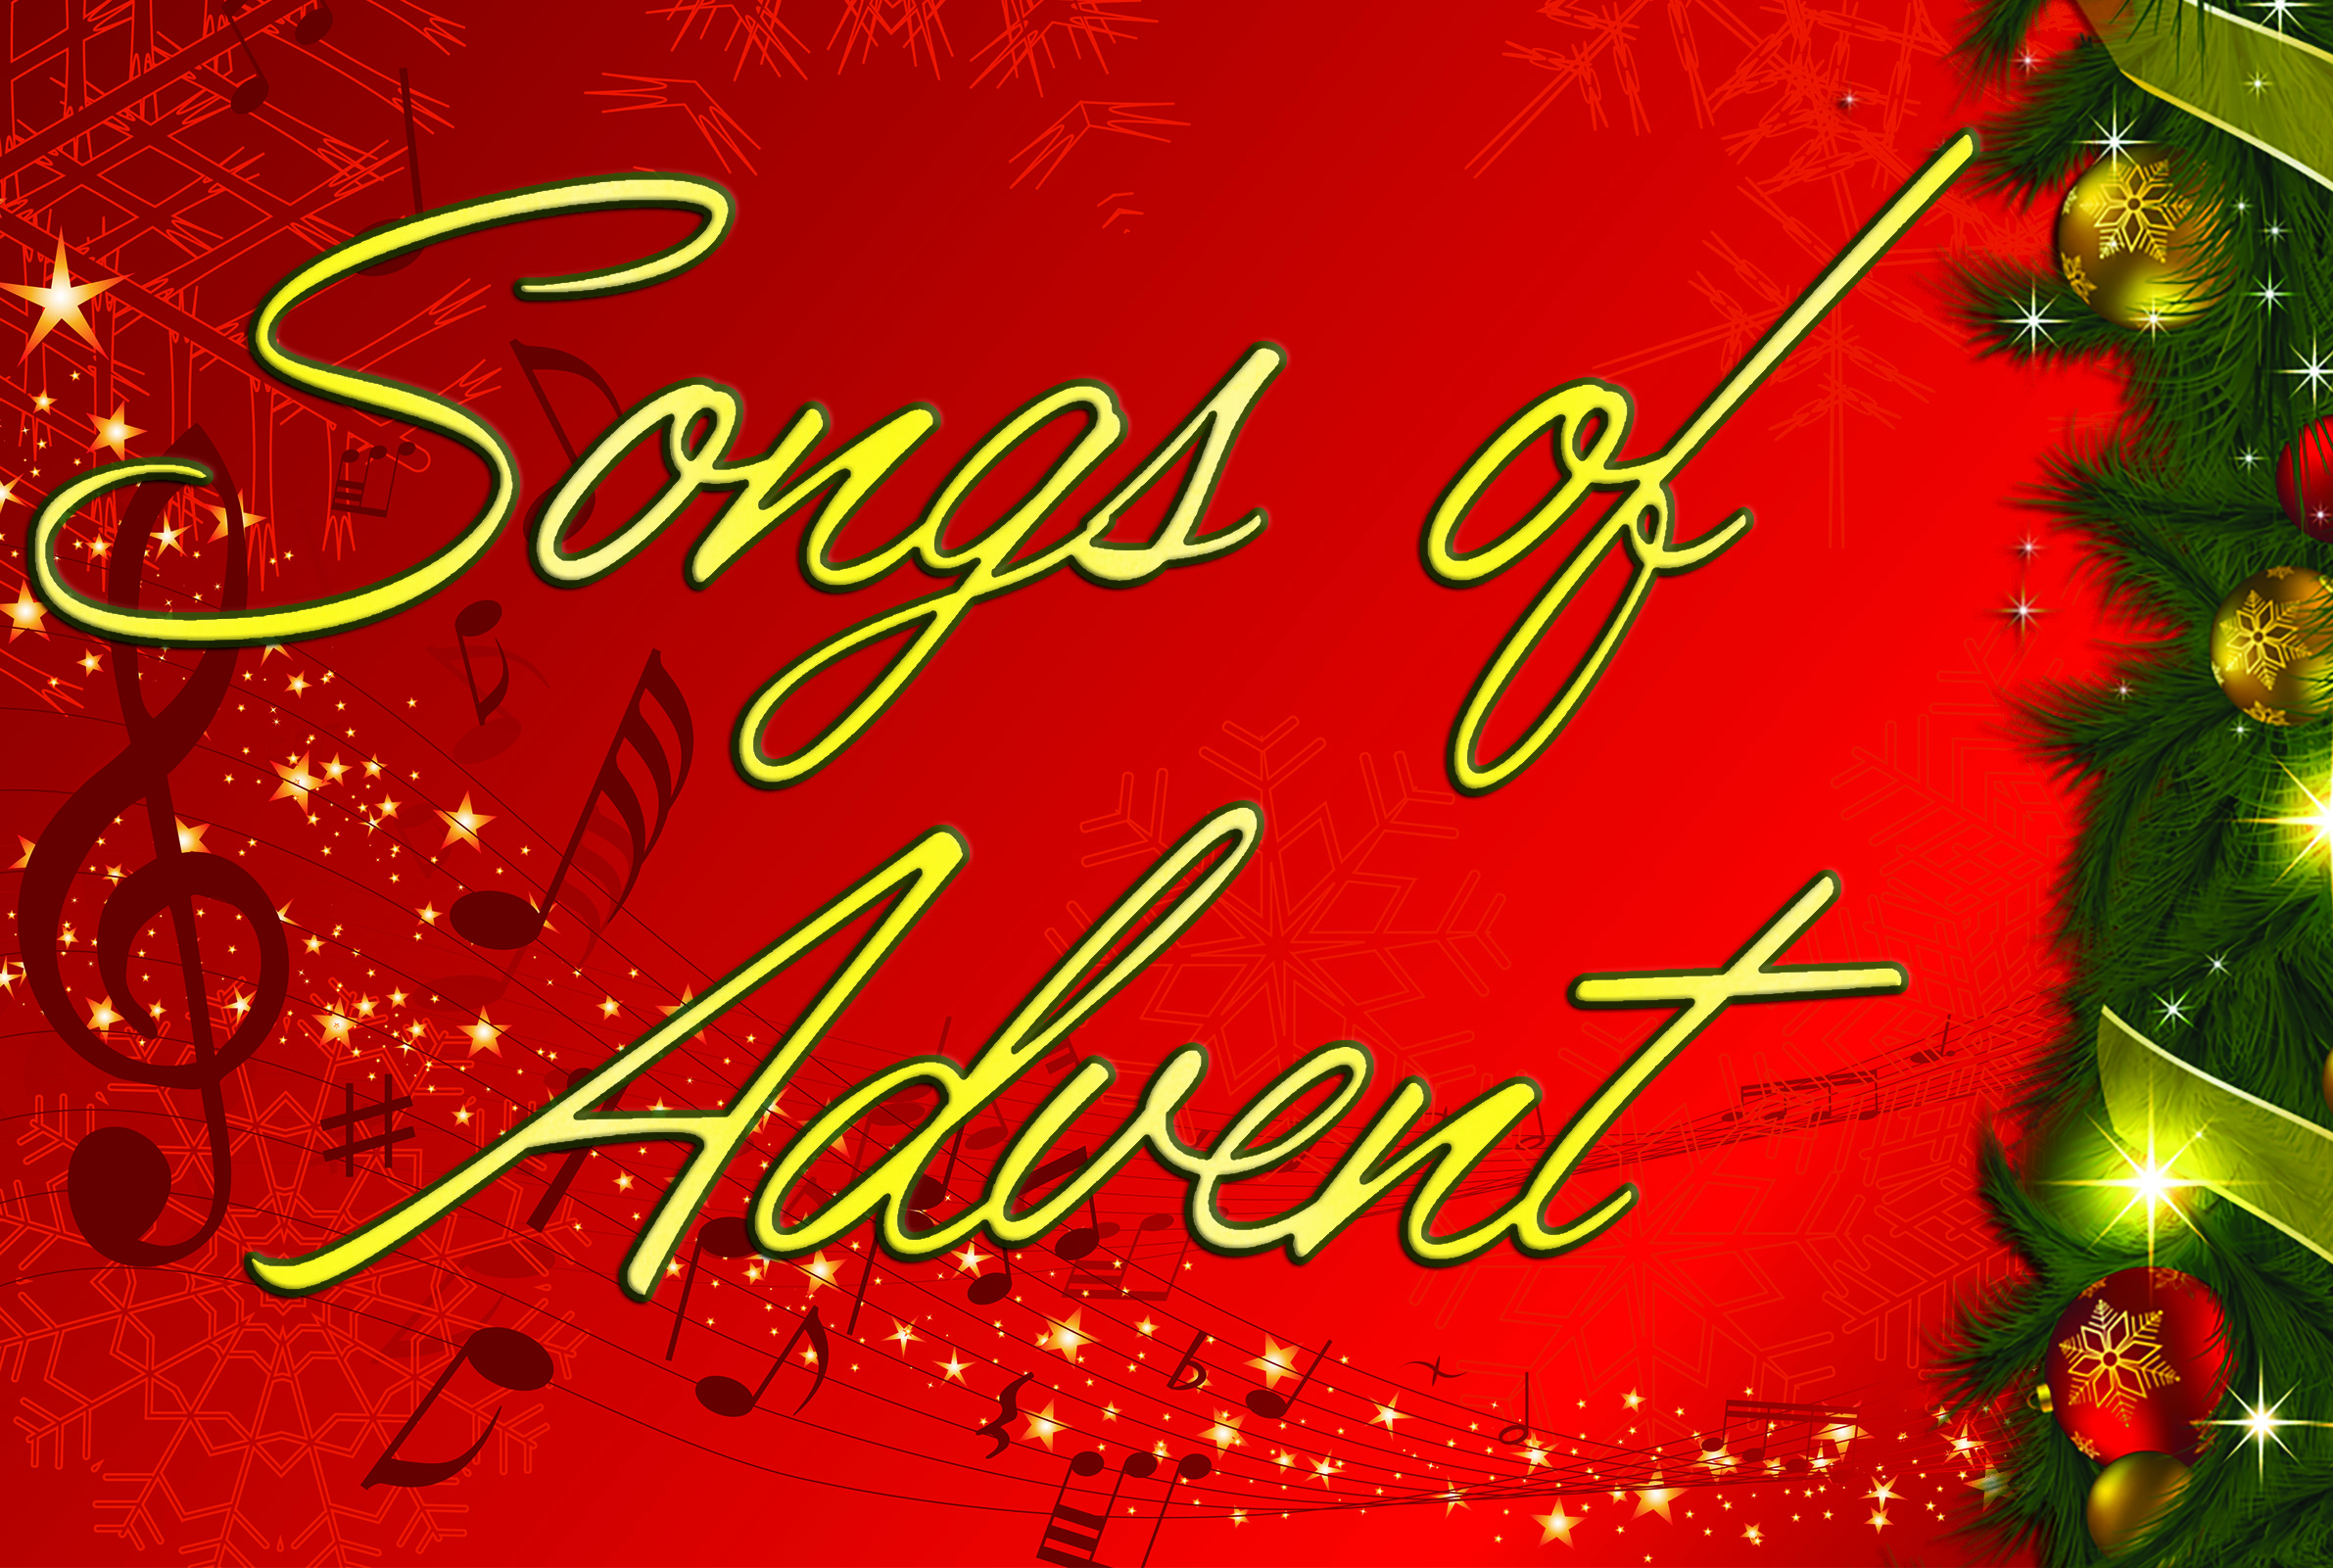 The Songs of Advent banner